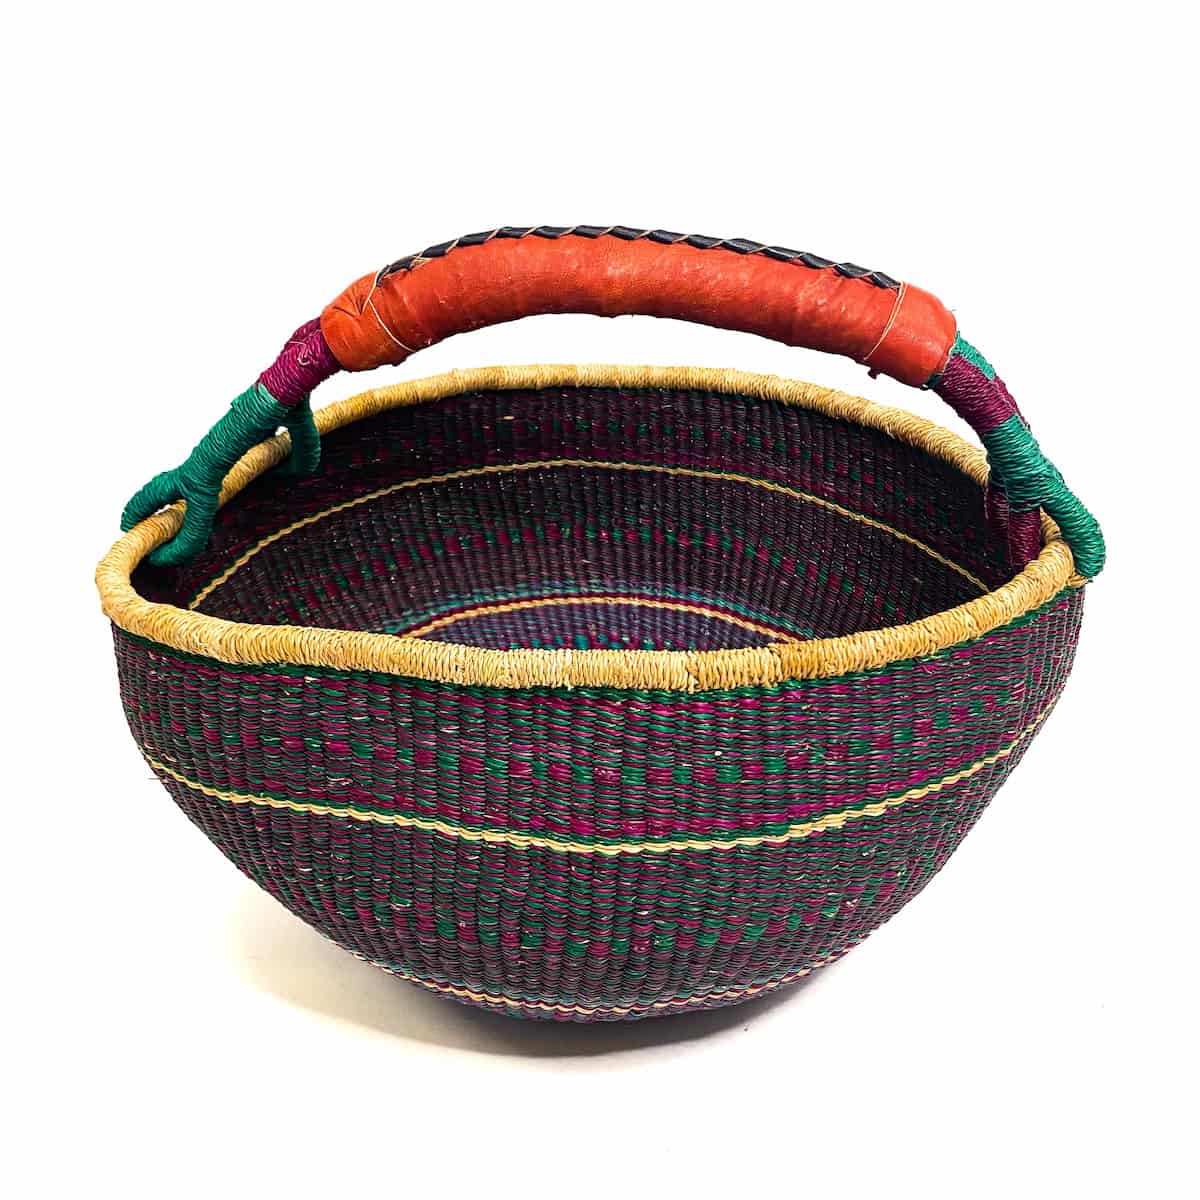 Large Round Baskets Teal and Purple Detail Variant sold out or unavailable